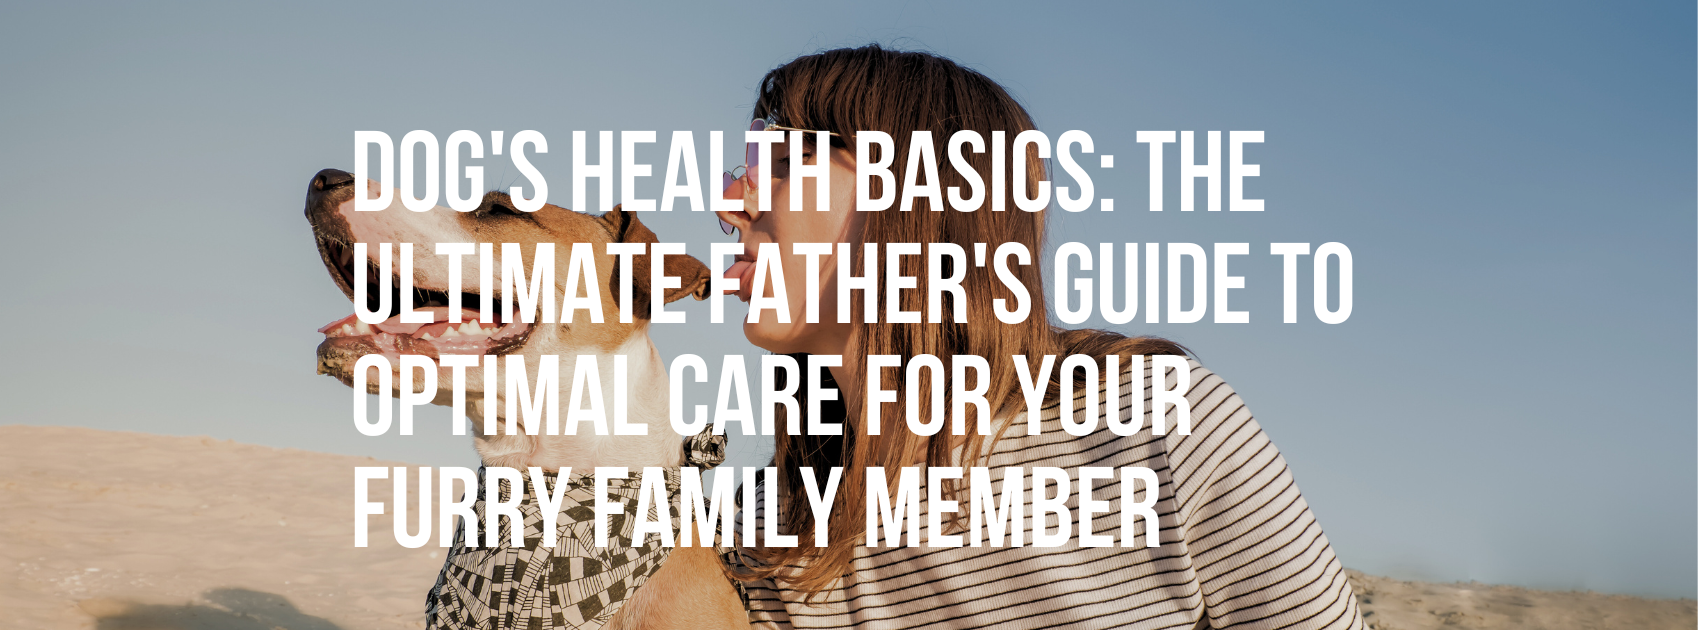 Dog's Health Basics: The Ultimate Father's Guide to Optimal Care for Your Furry Family Member